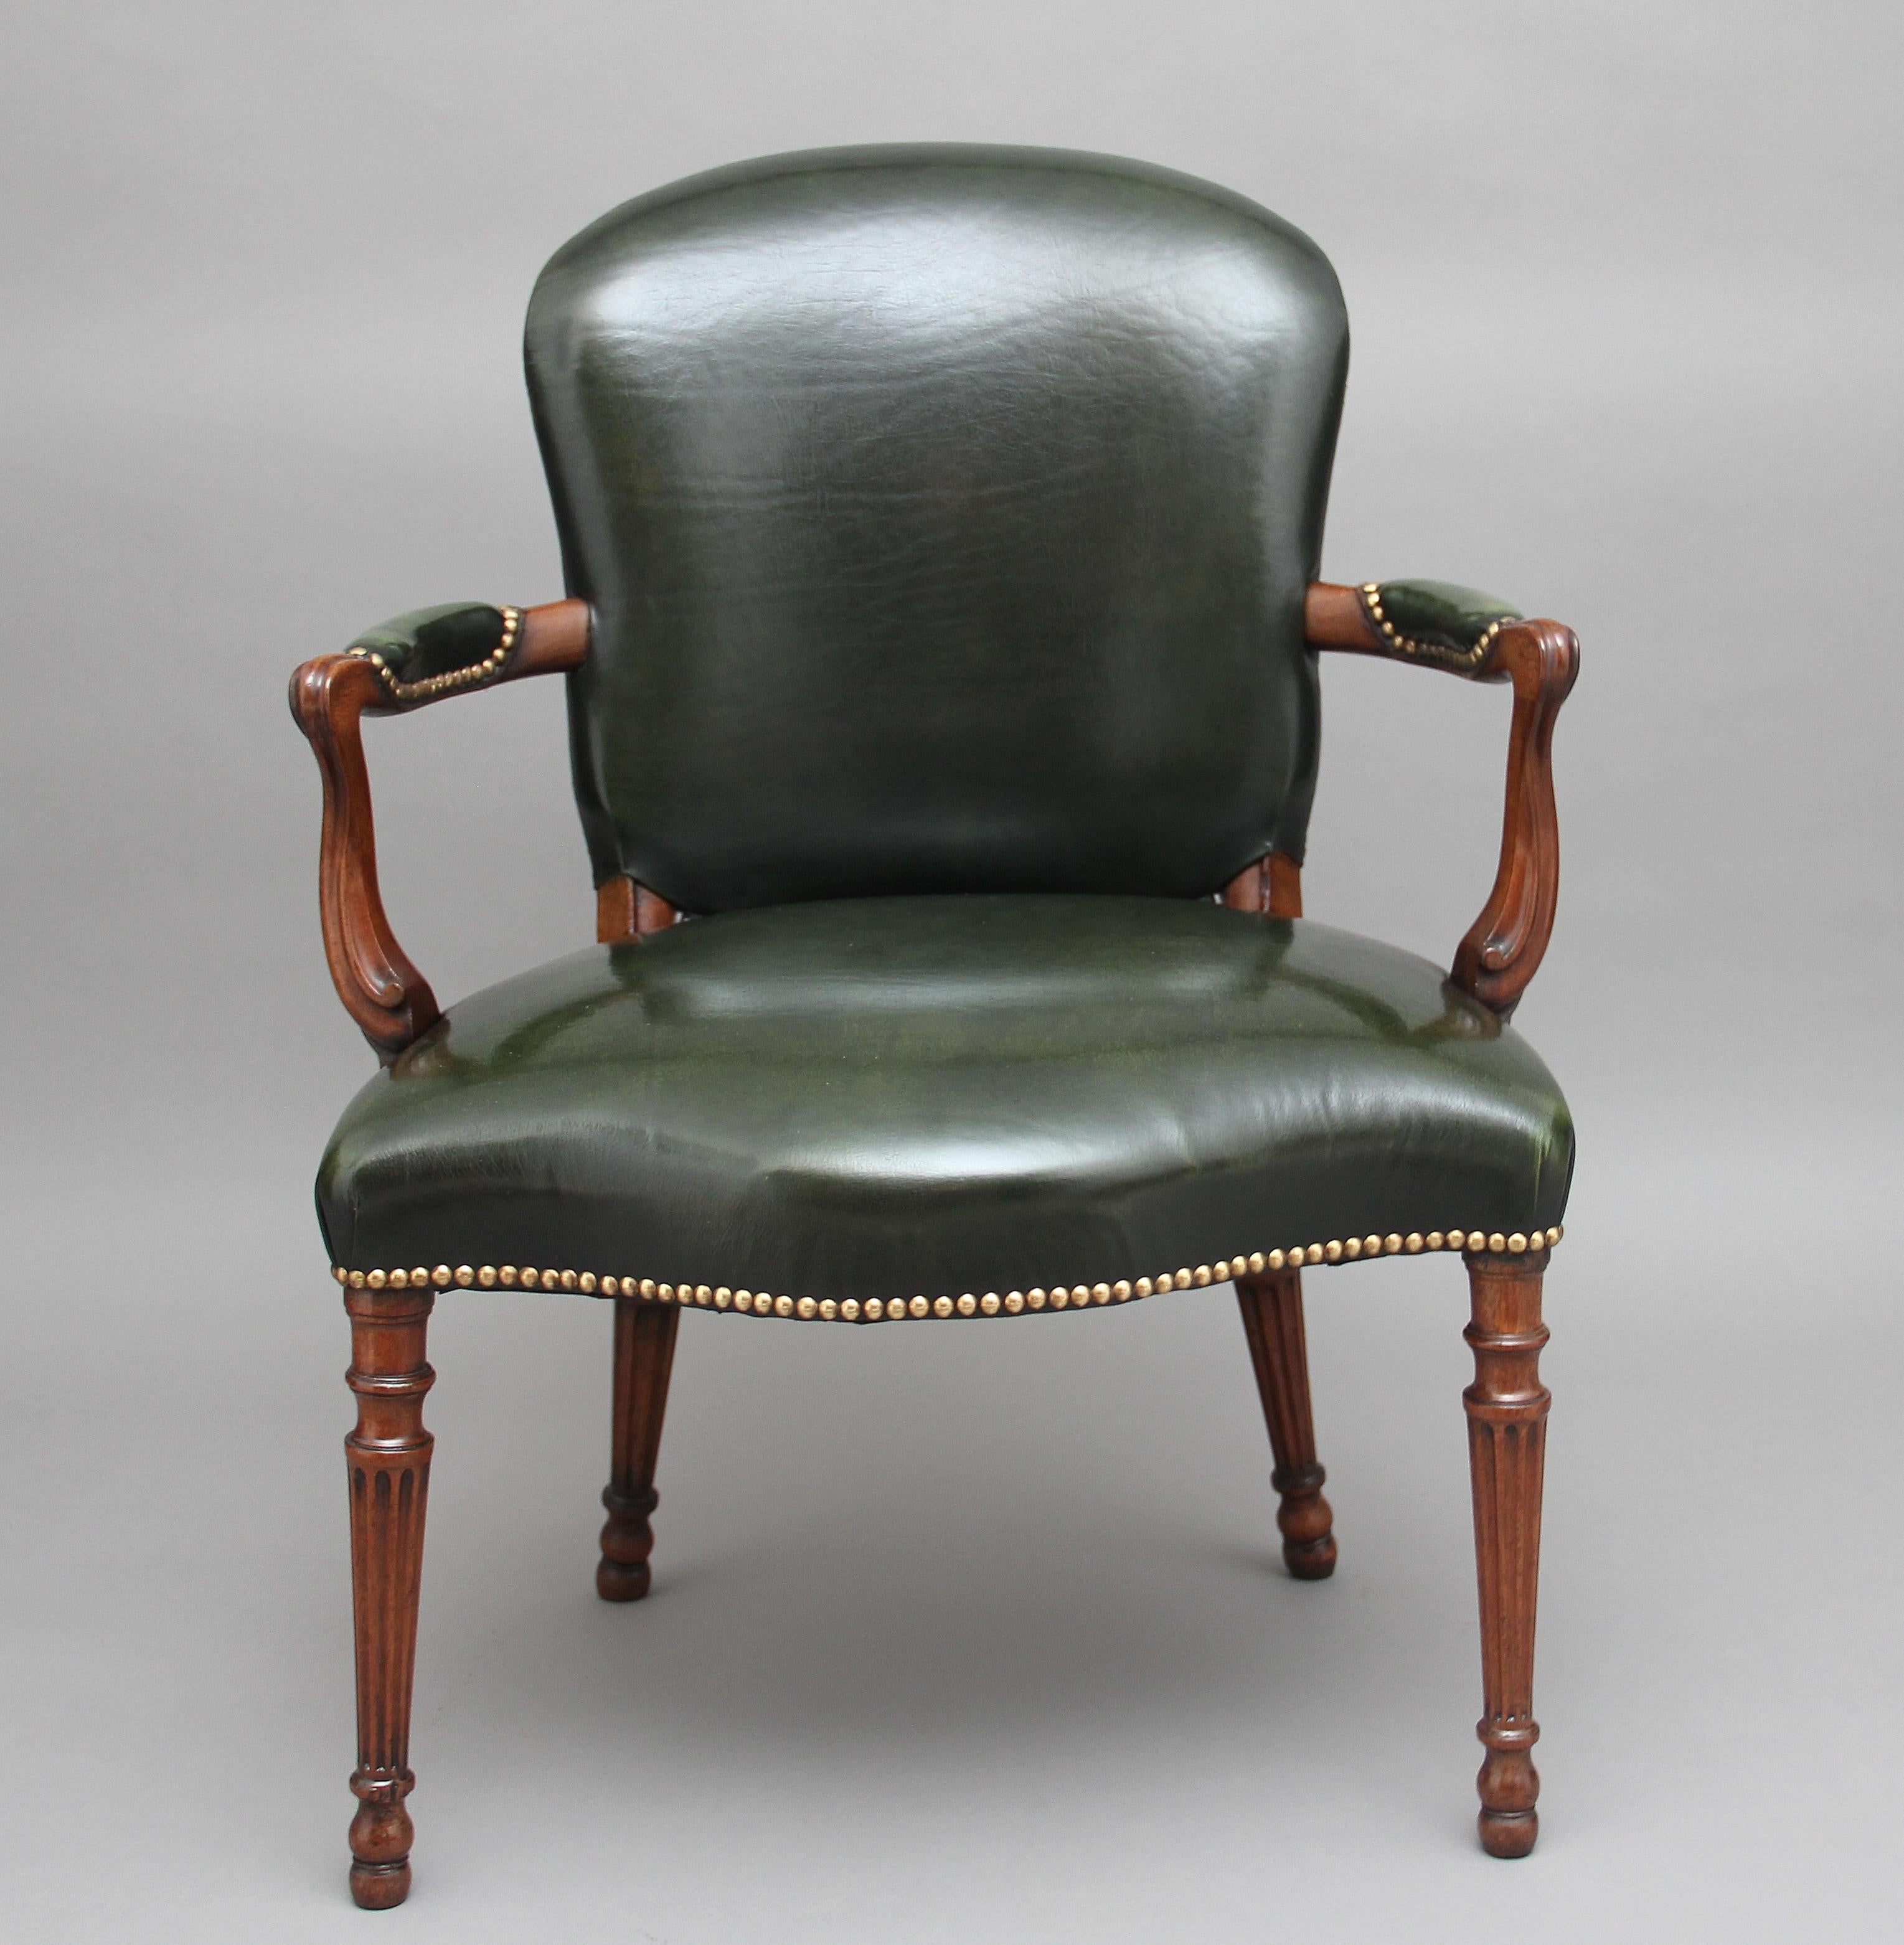 Early 19th century mahogany open armchair upholstered in green leather with brass stud decoration, standing on turned and fluted legs, a generous serpentine shaped seat with carved arms and shaped back, circa 1830.
 